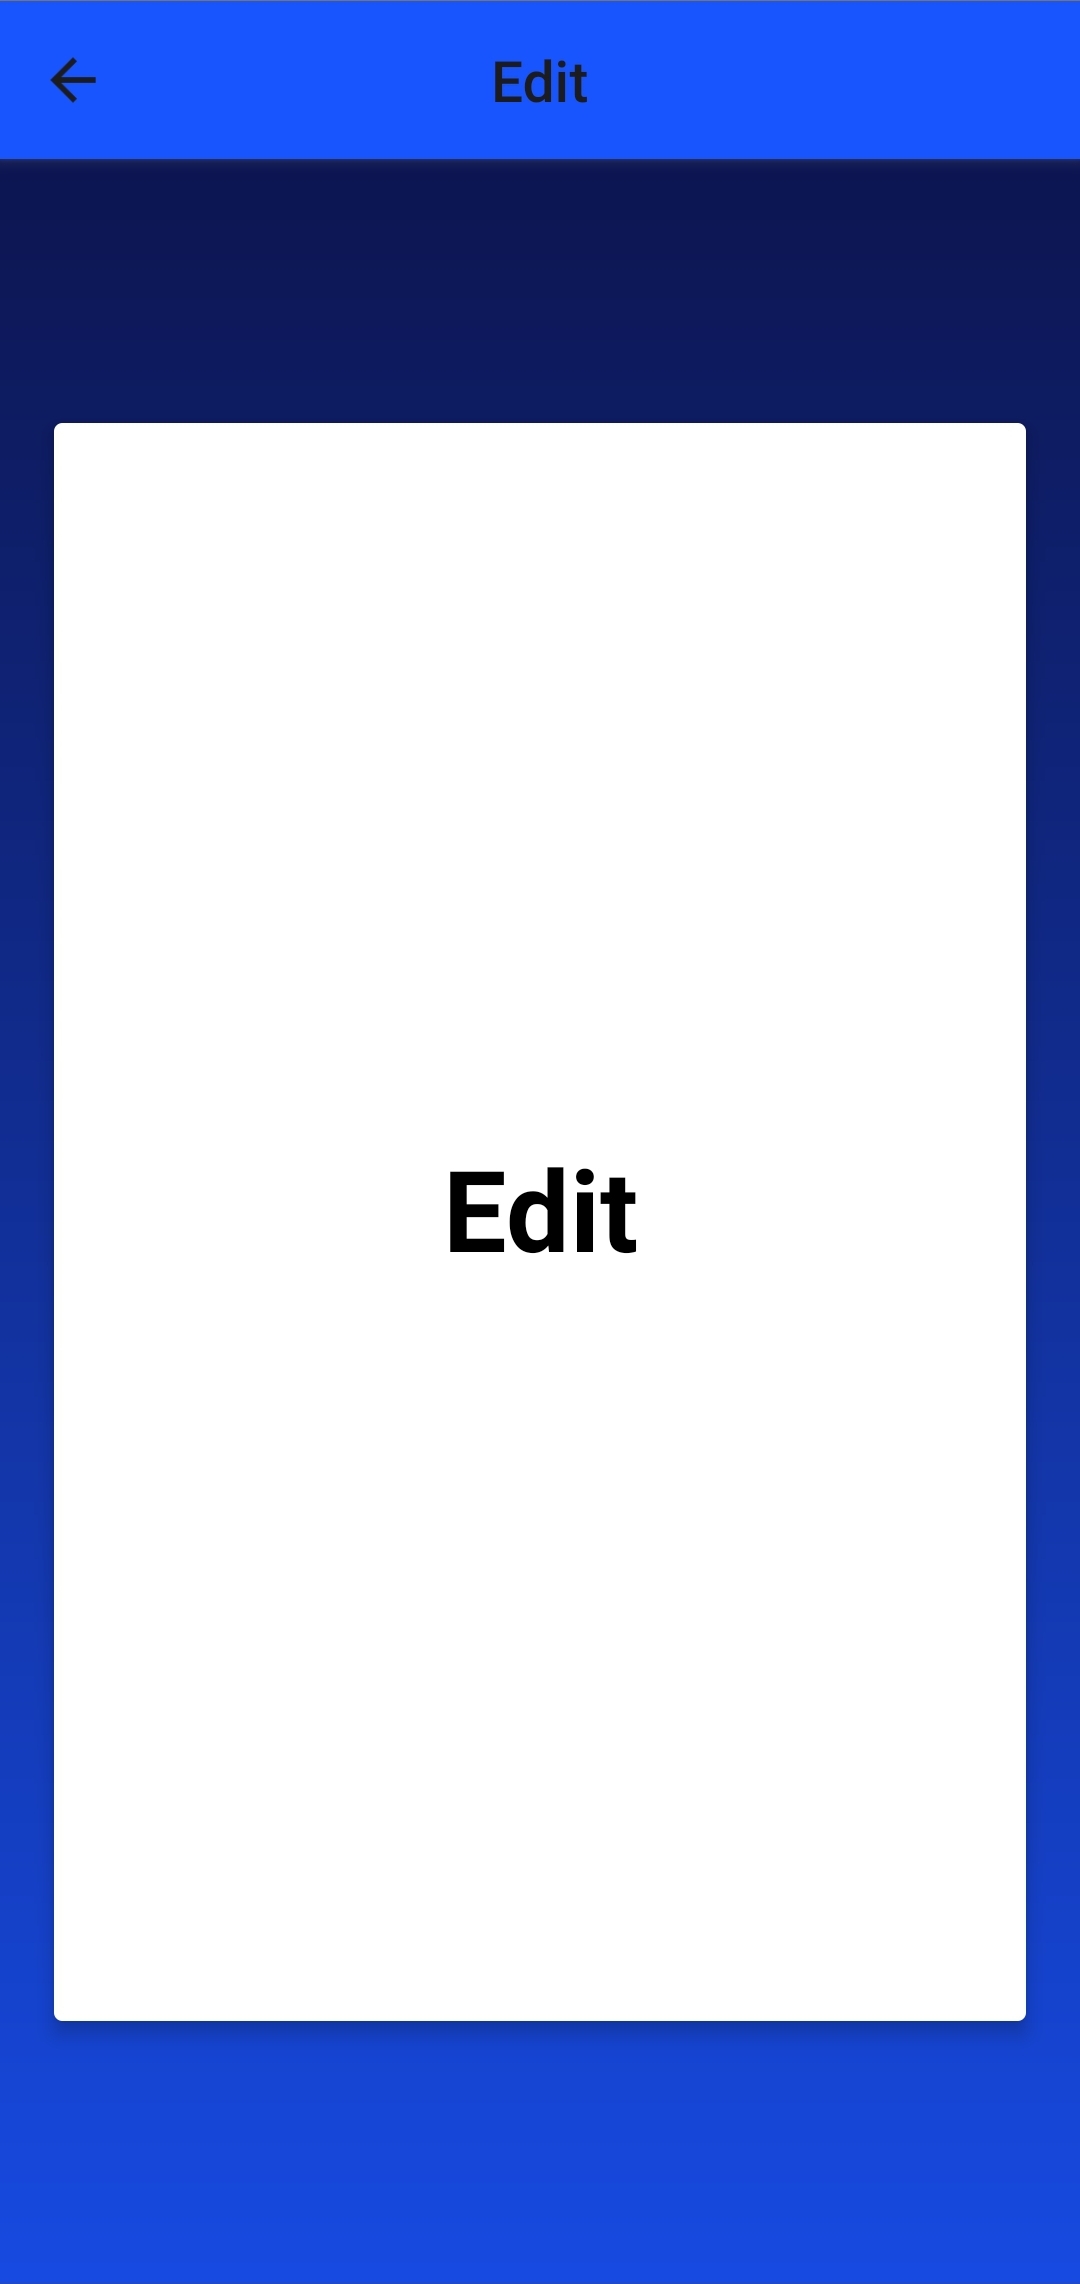 A screenshot of a mobile device running the demo tru.ID application. The background is blue with a white card over the top. On this card is a label 'Edit'